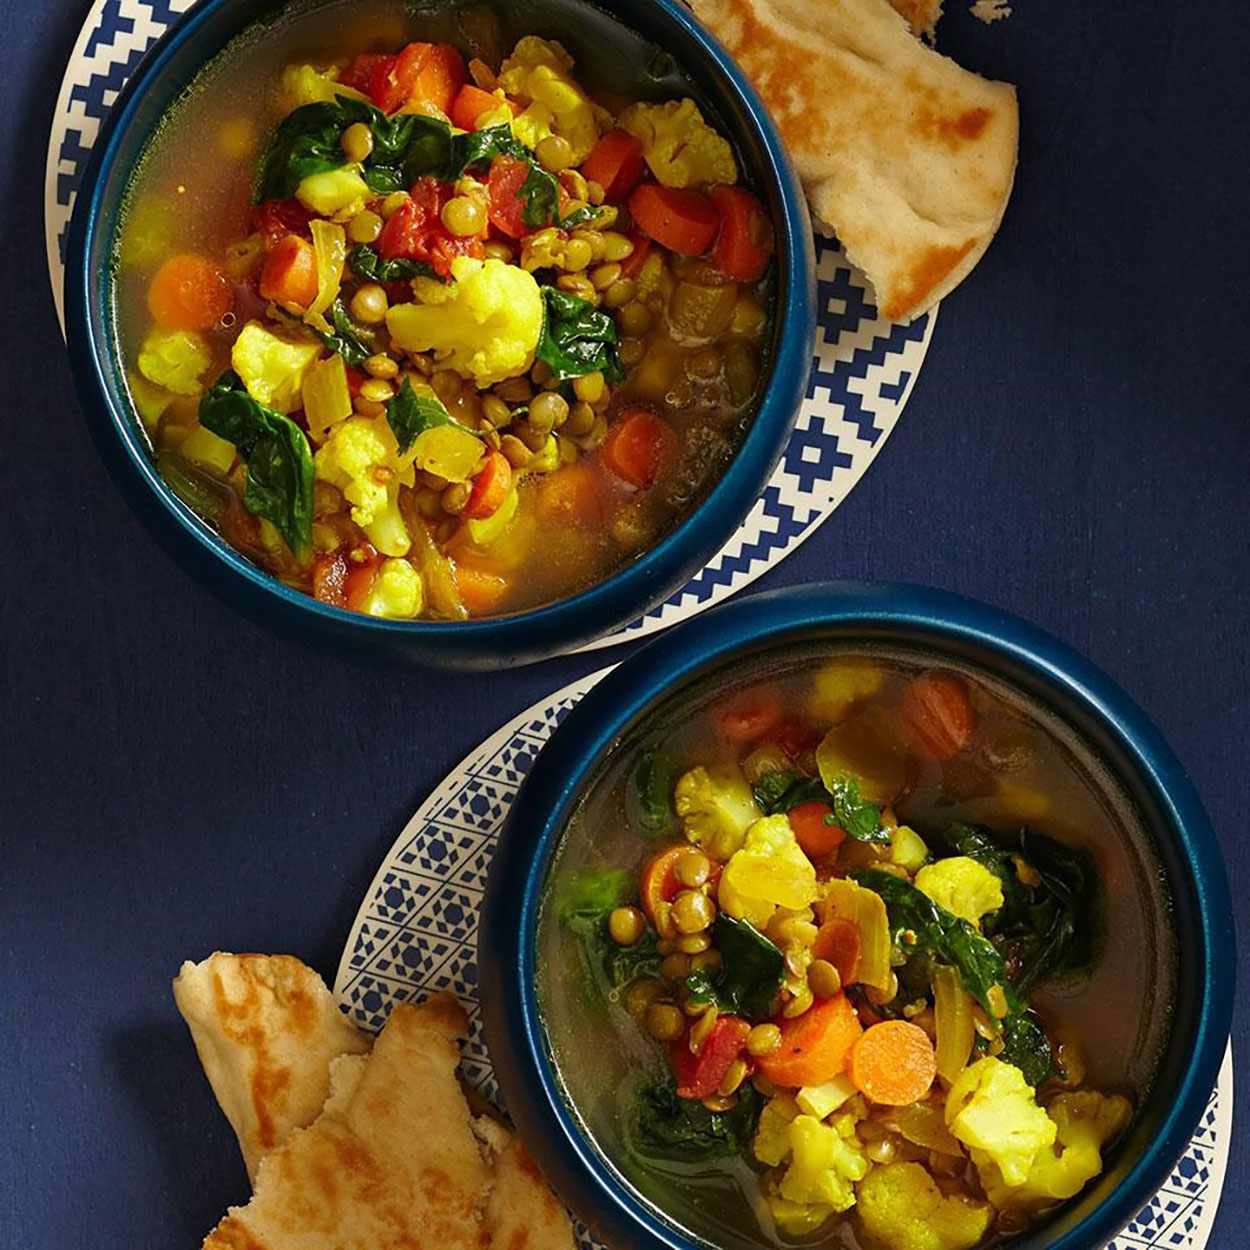 Slow-Cooker Moroccan Lentil Soup in bowls with flat bread